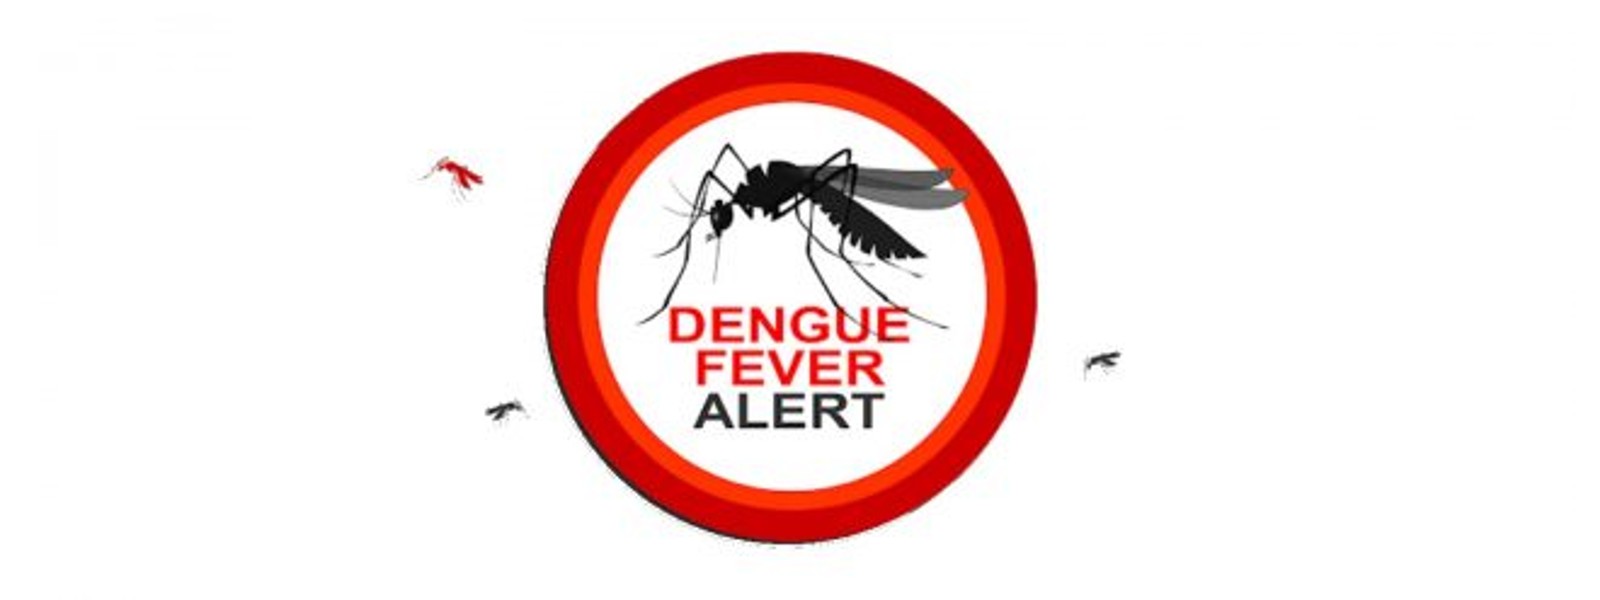 Sri Lanka declares special dengue control days after over 70,000 cases were reported in 2022